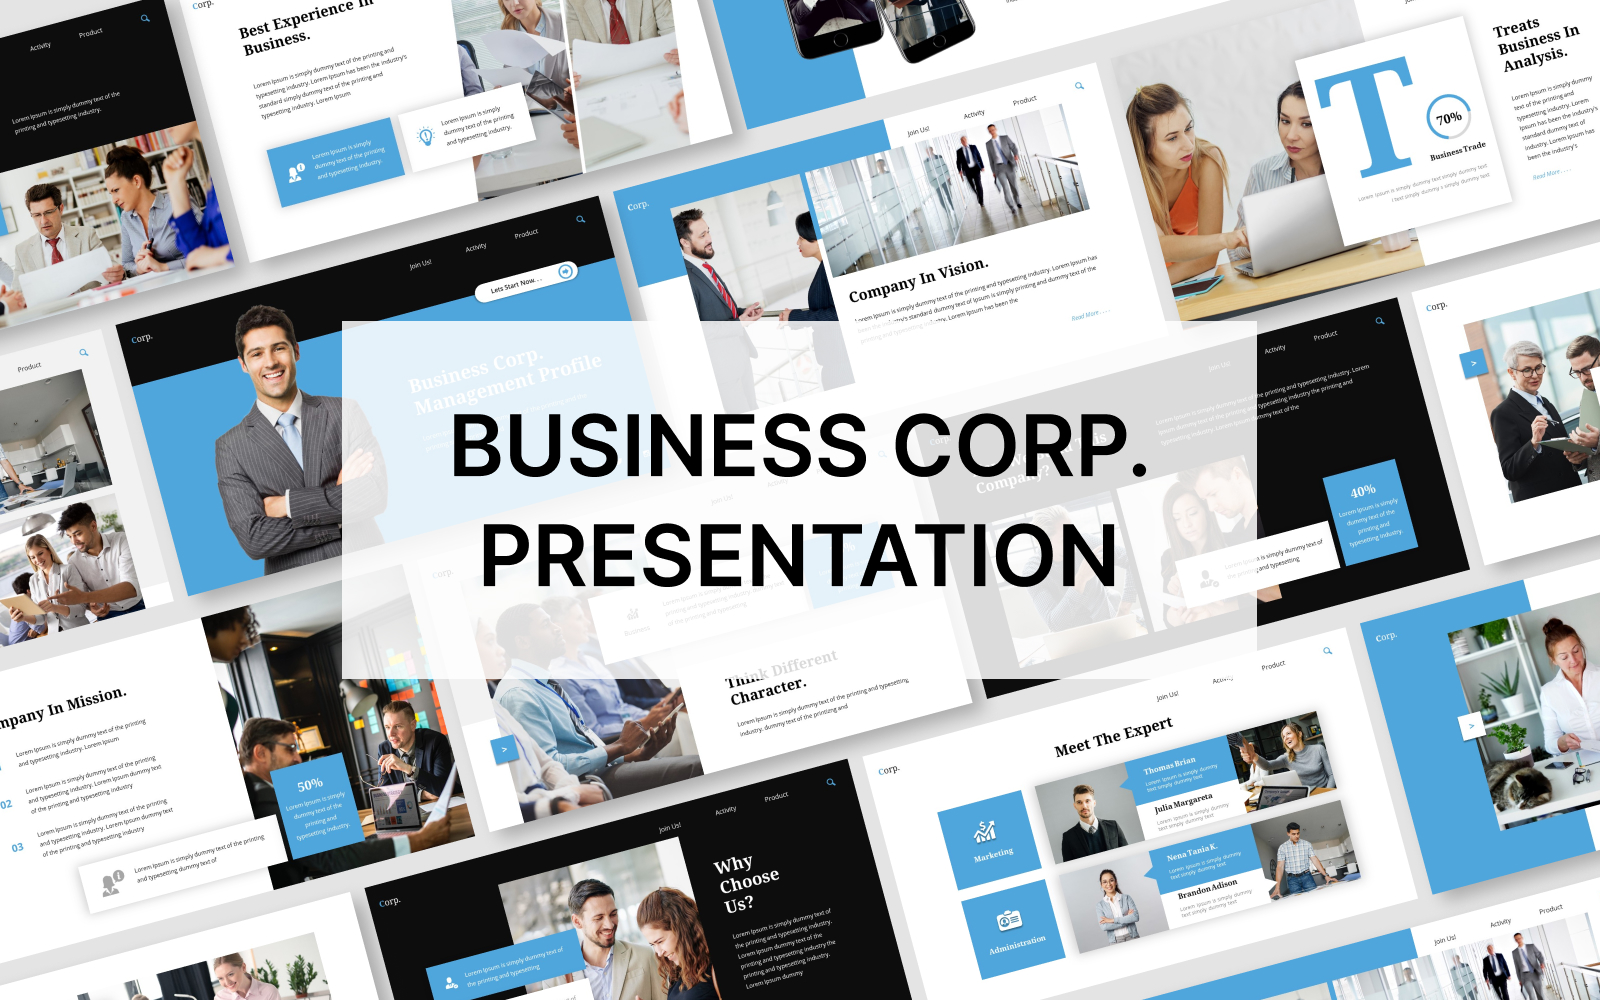 Business Corp. Powerpoint Presentation Template